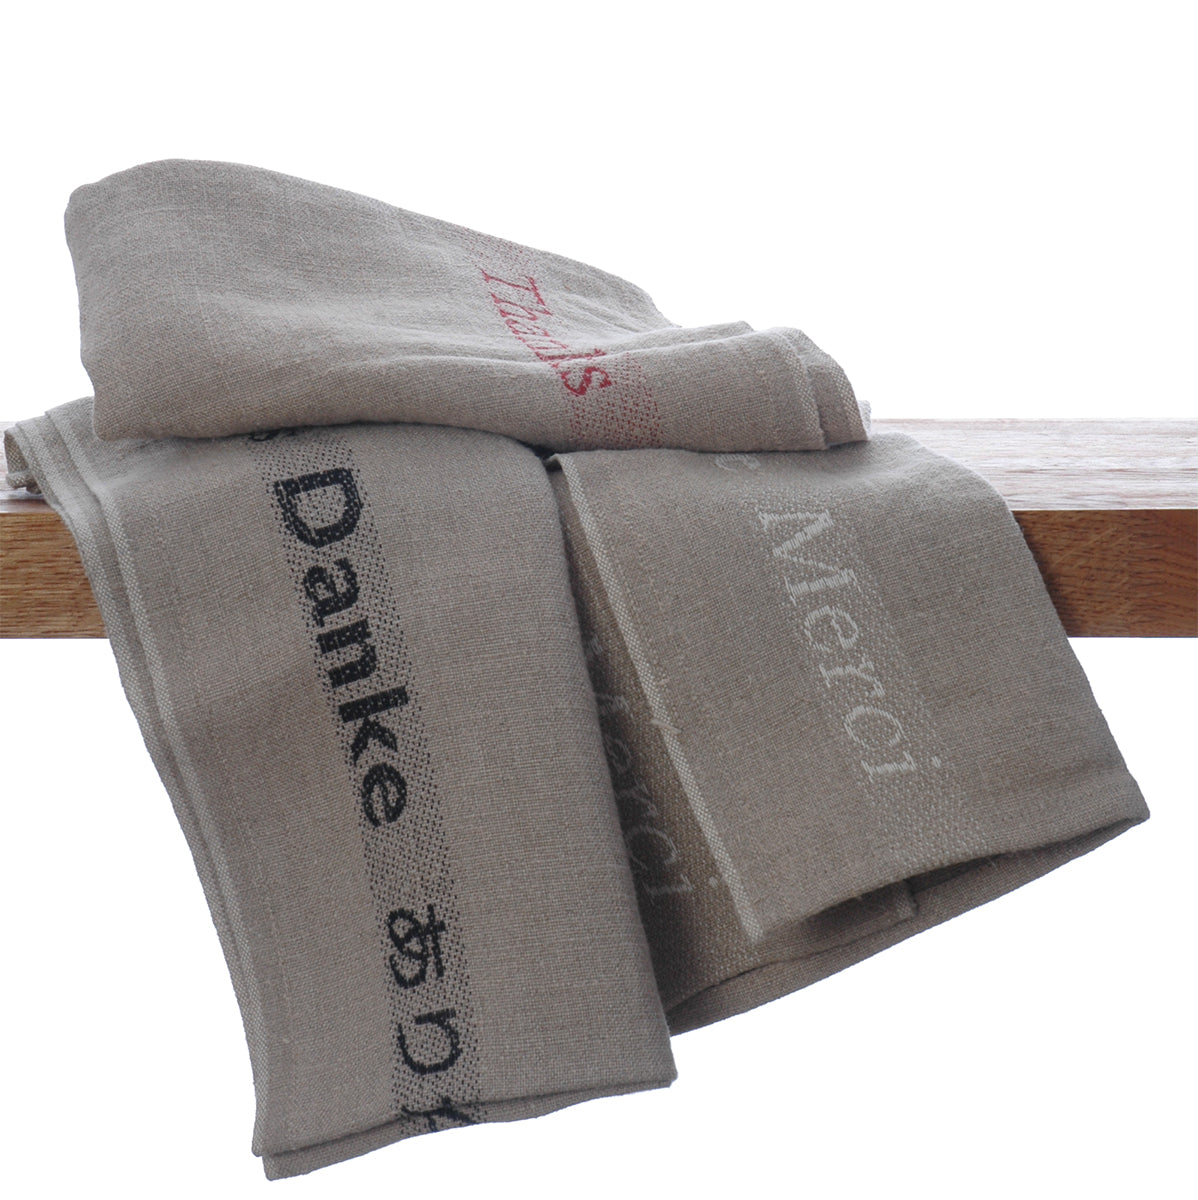 Pure Linen Tea Towel With Thanks From Around the World Detailing